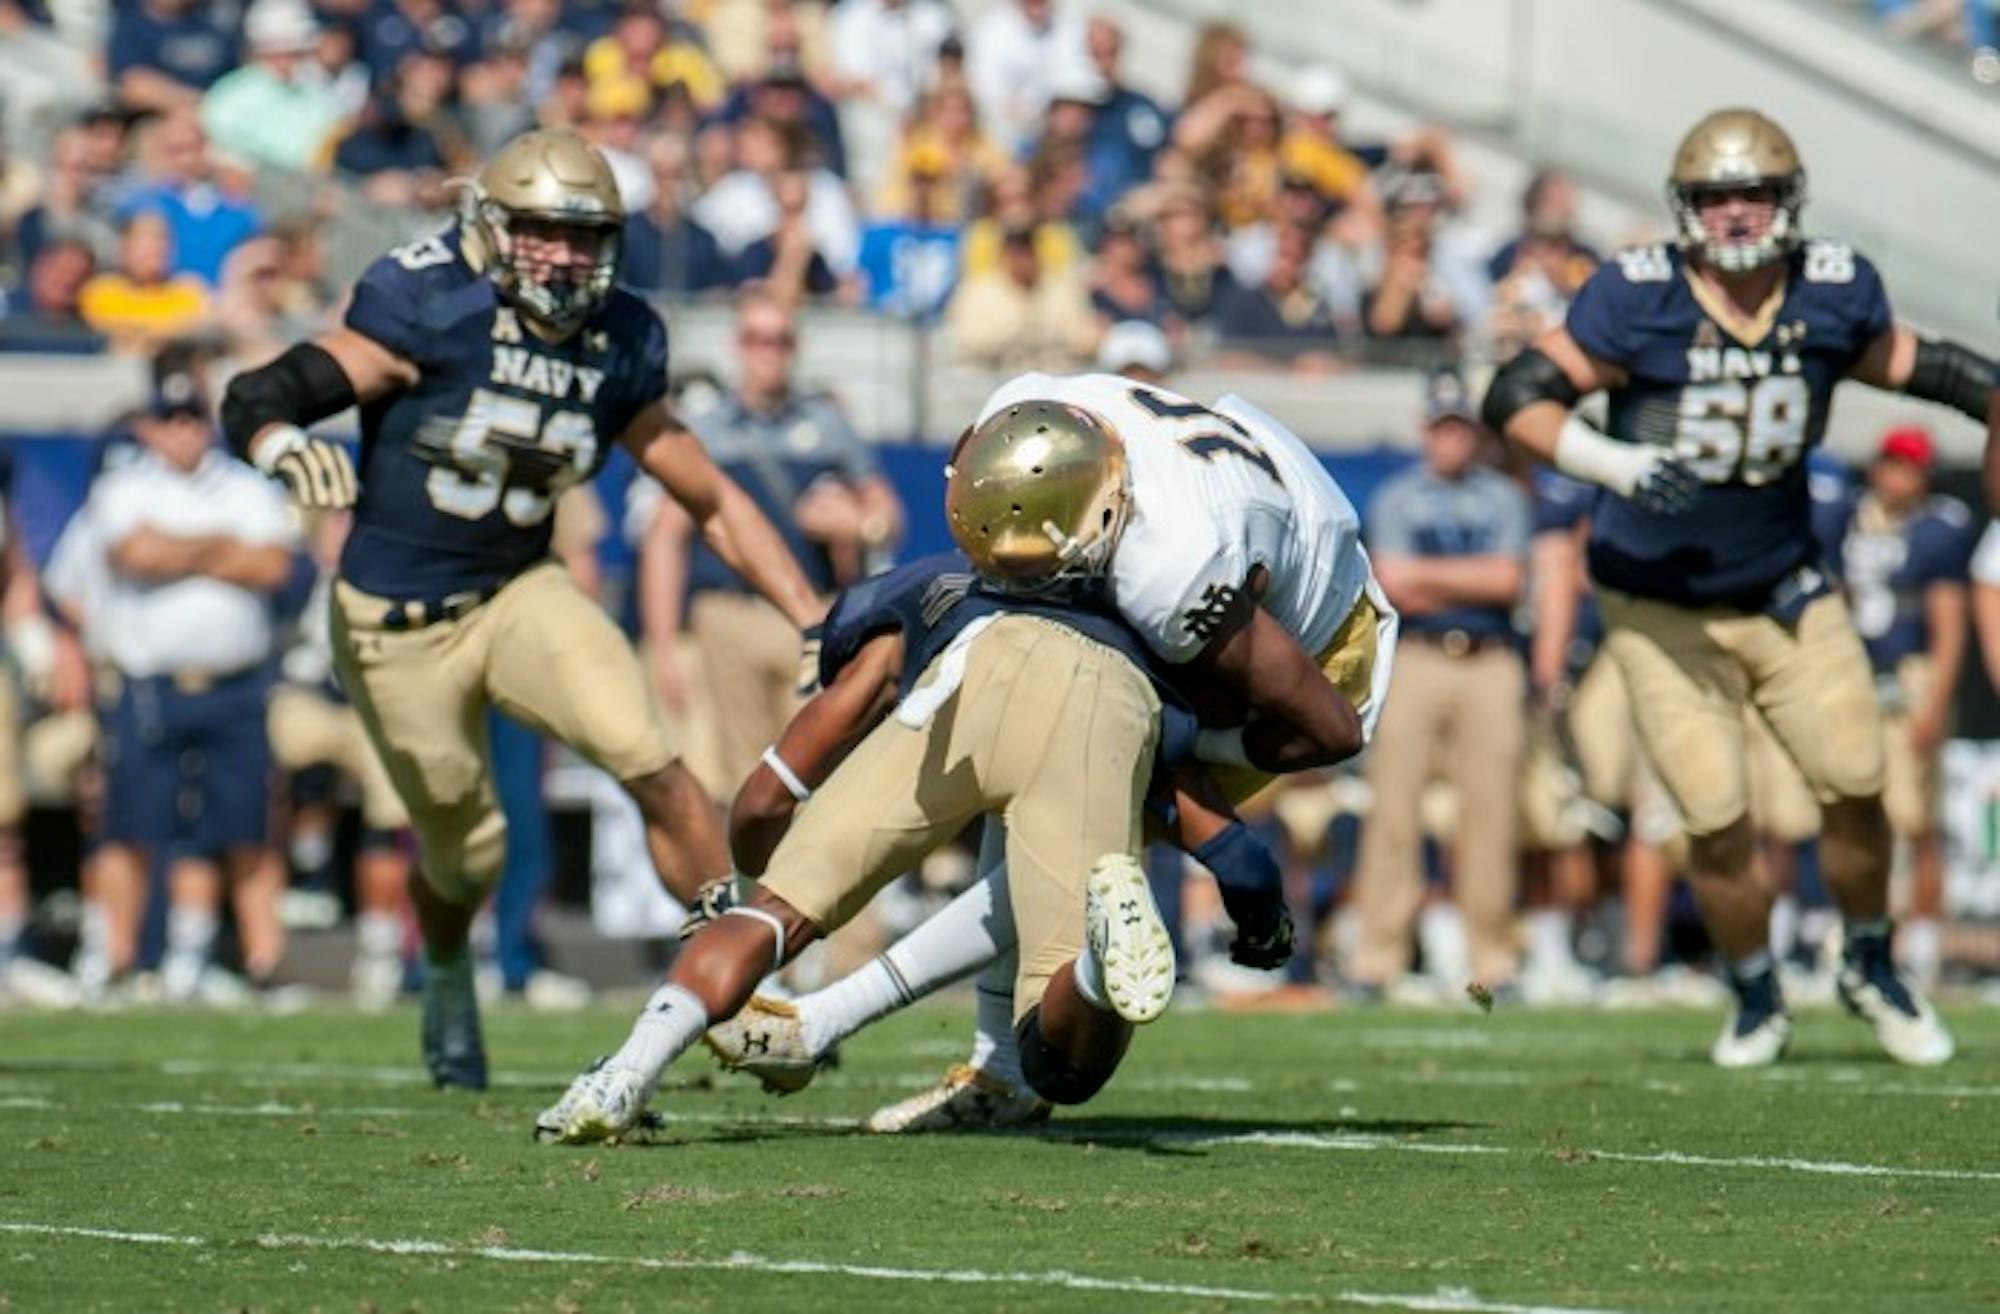 Irish senior receiver Torii Hunter Jr. takes a hit form a Navy defender during Notre Dame's 28-27 loss to the Midshipmen. Hunter Jr. had 104 yards receiving and one touchdown in the contest.